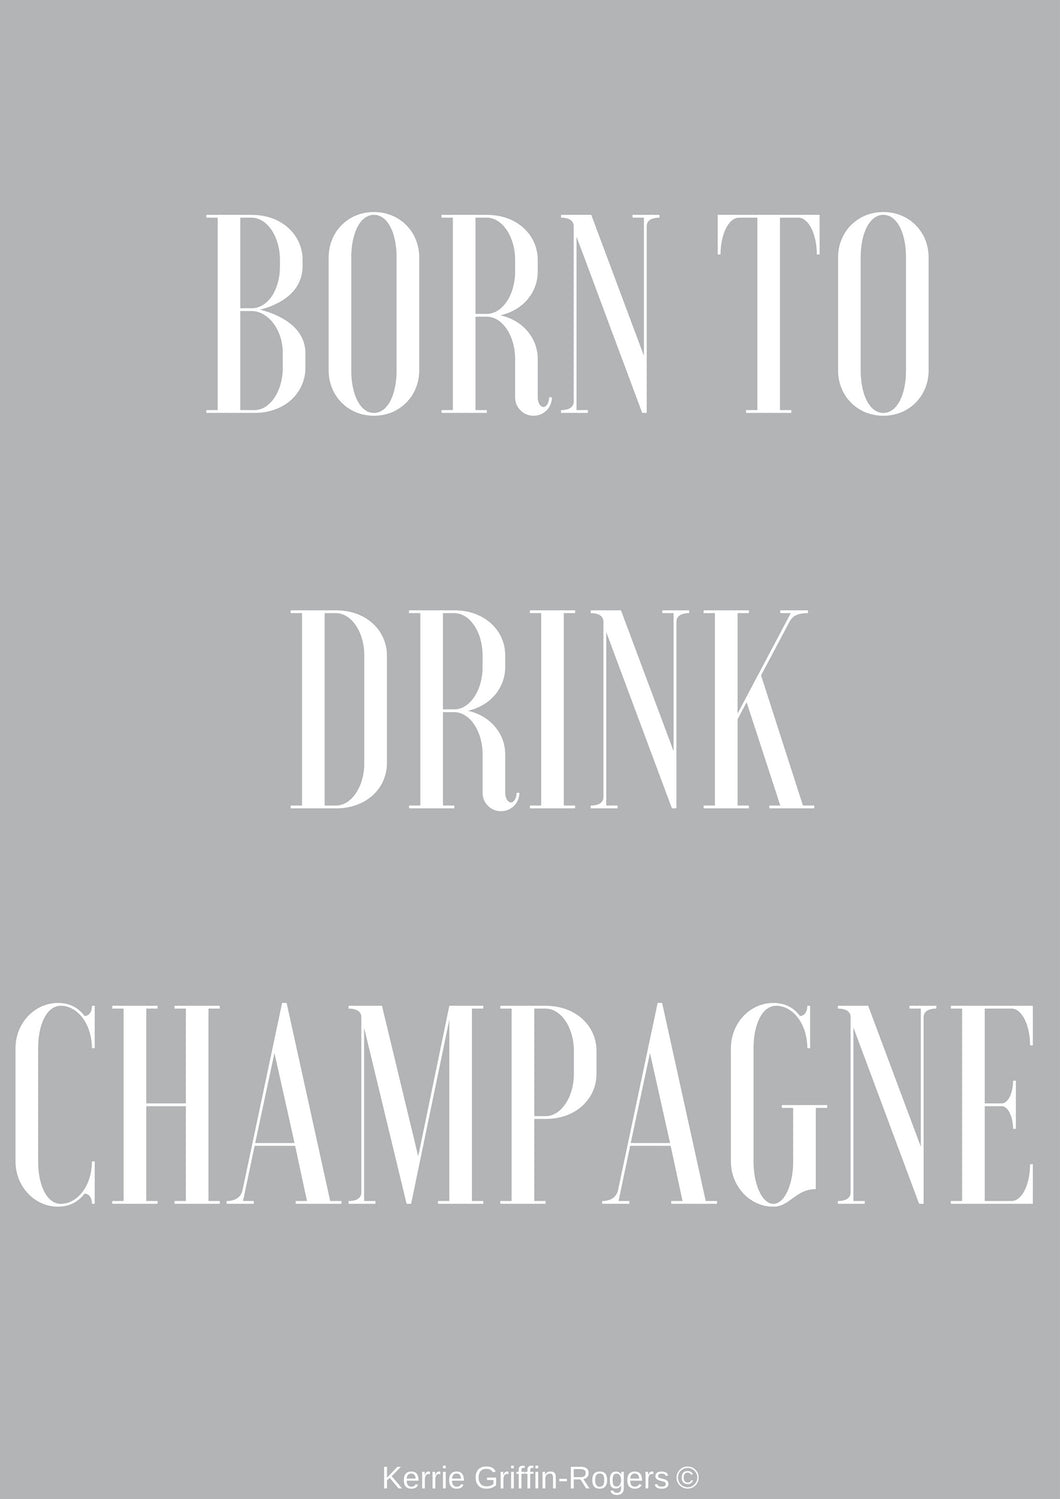 Framed Print - Born to drink champagne